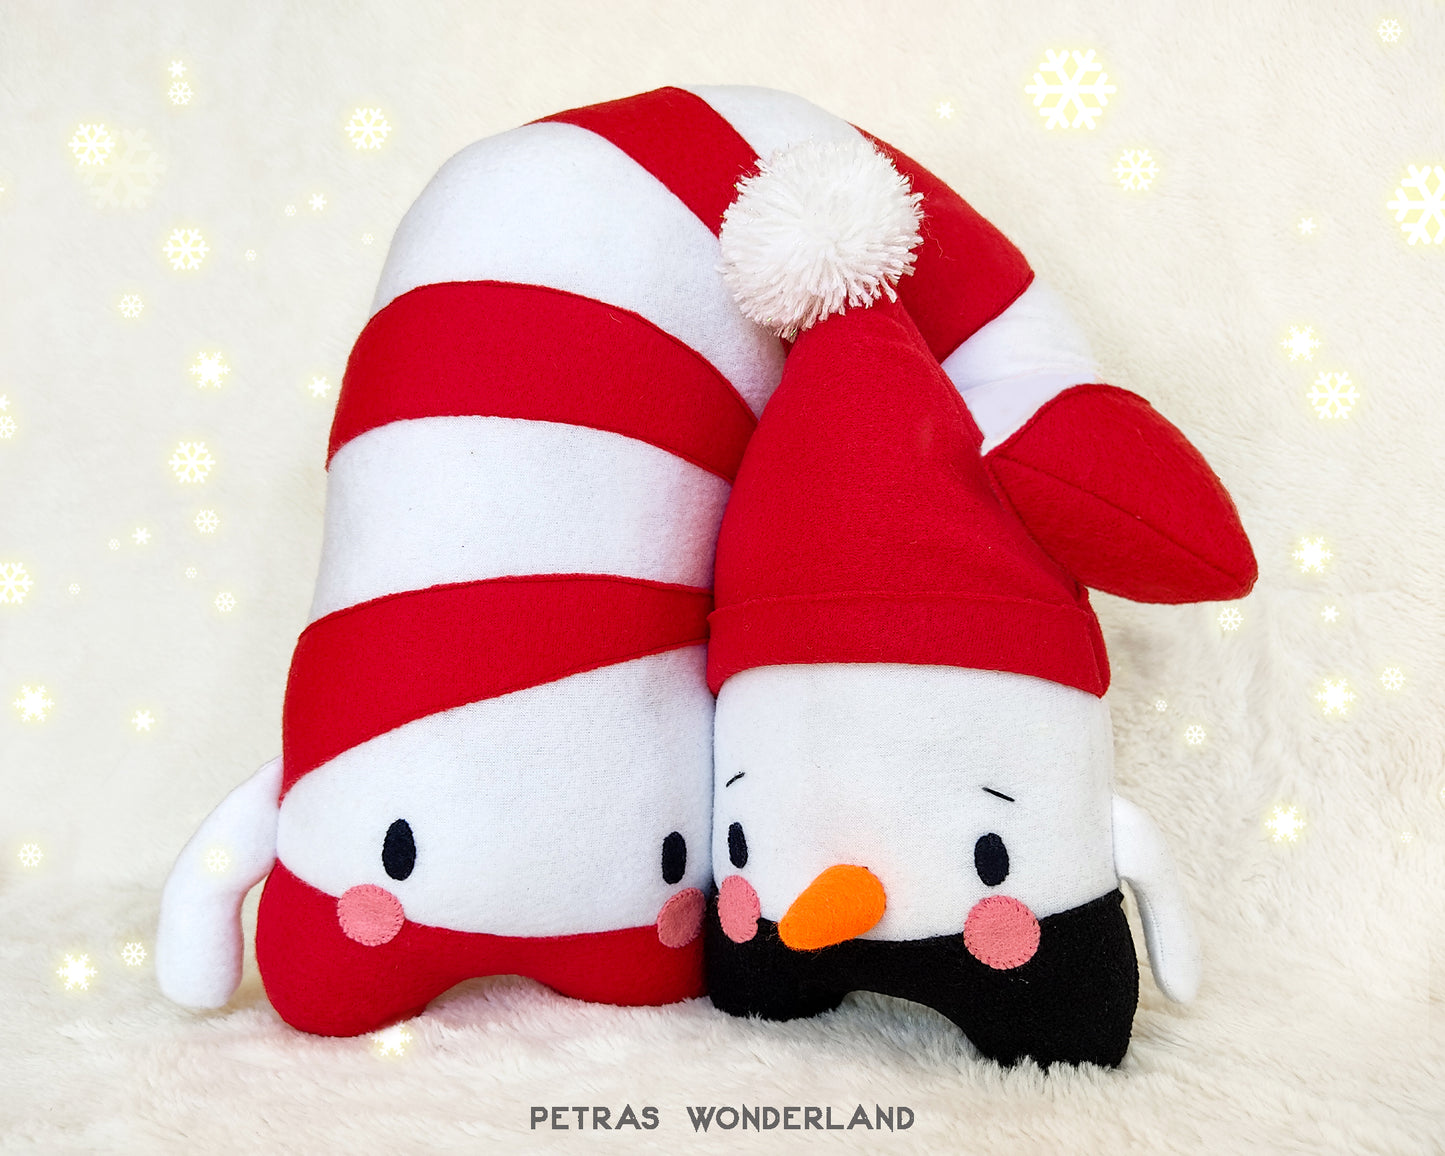 Christmas set of 2 patterns: Candy Stick Pillow and Snowman Toy - PDF toy sewing patterns and tutorials 07